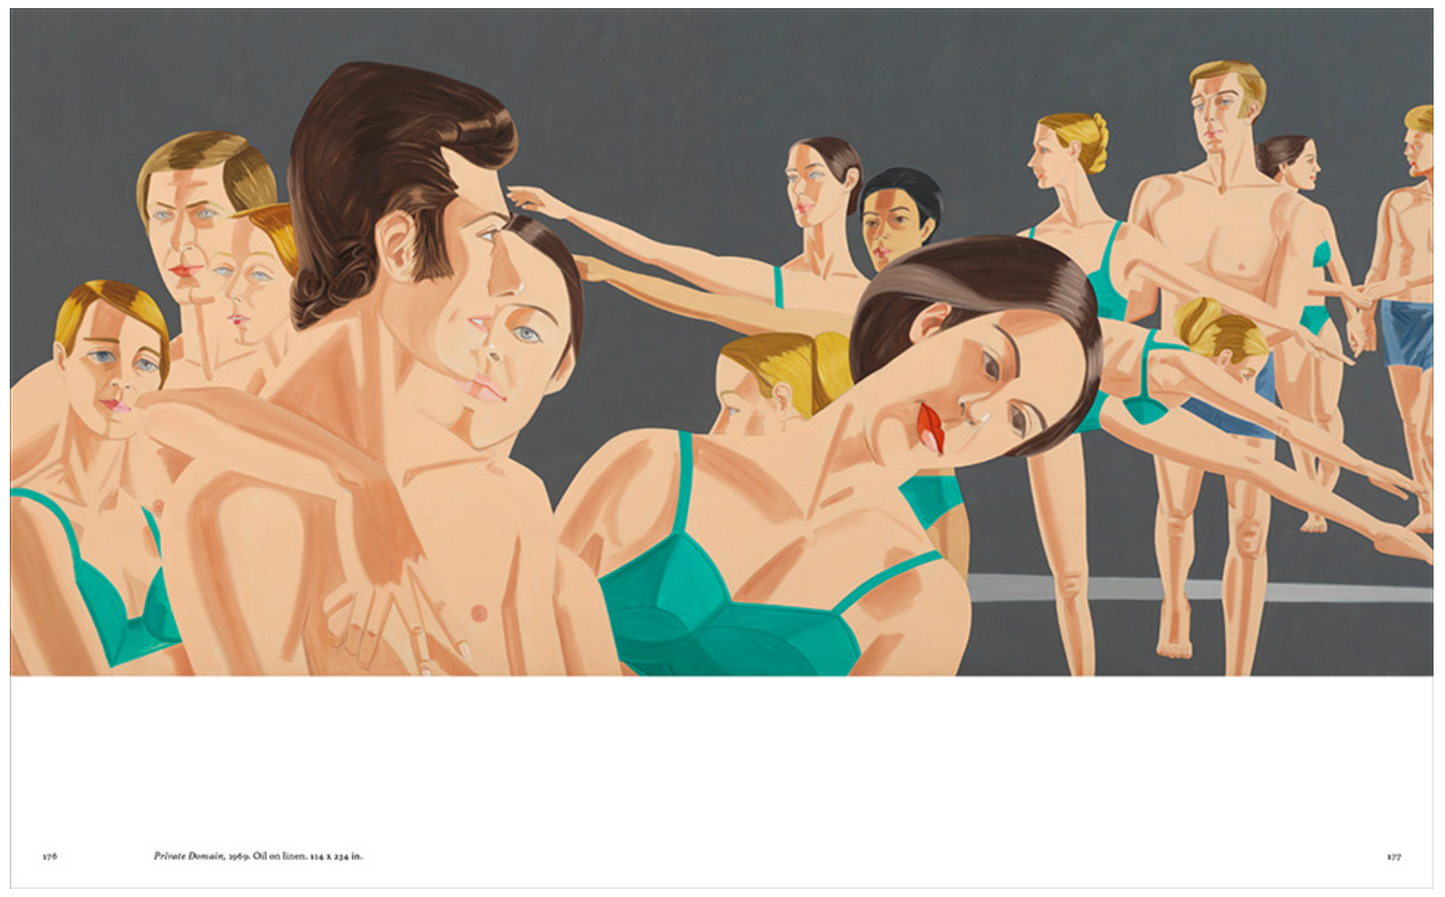 Inside page from ‘Alex Katz: Theater & Dance’ featuring illustration of men and women stretching